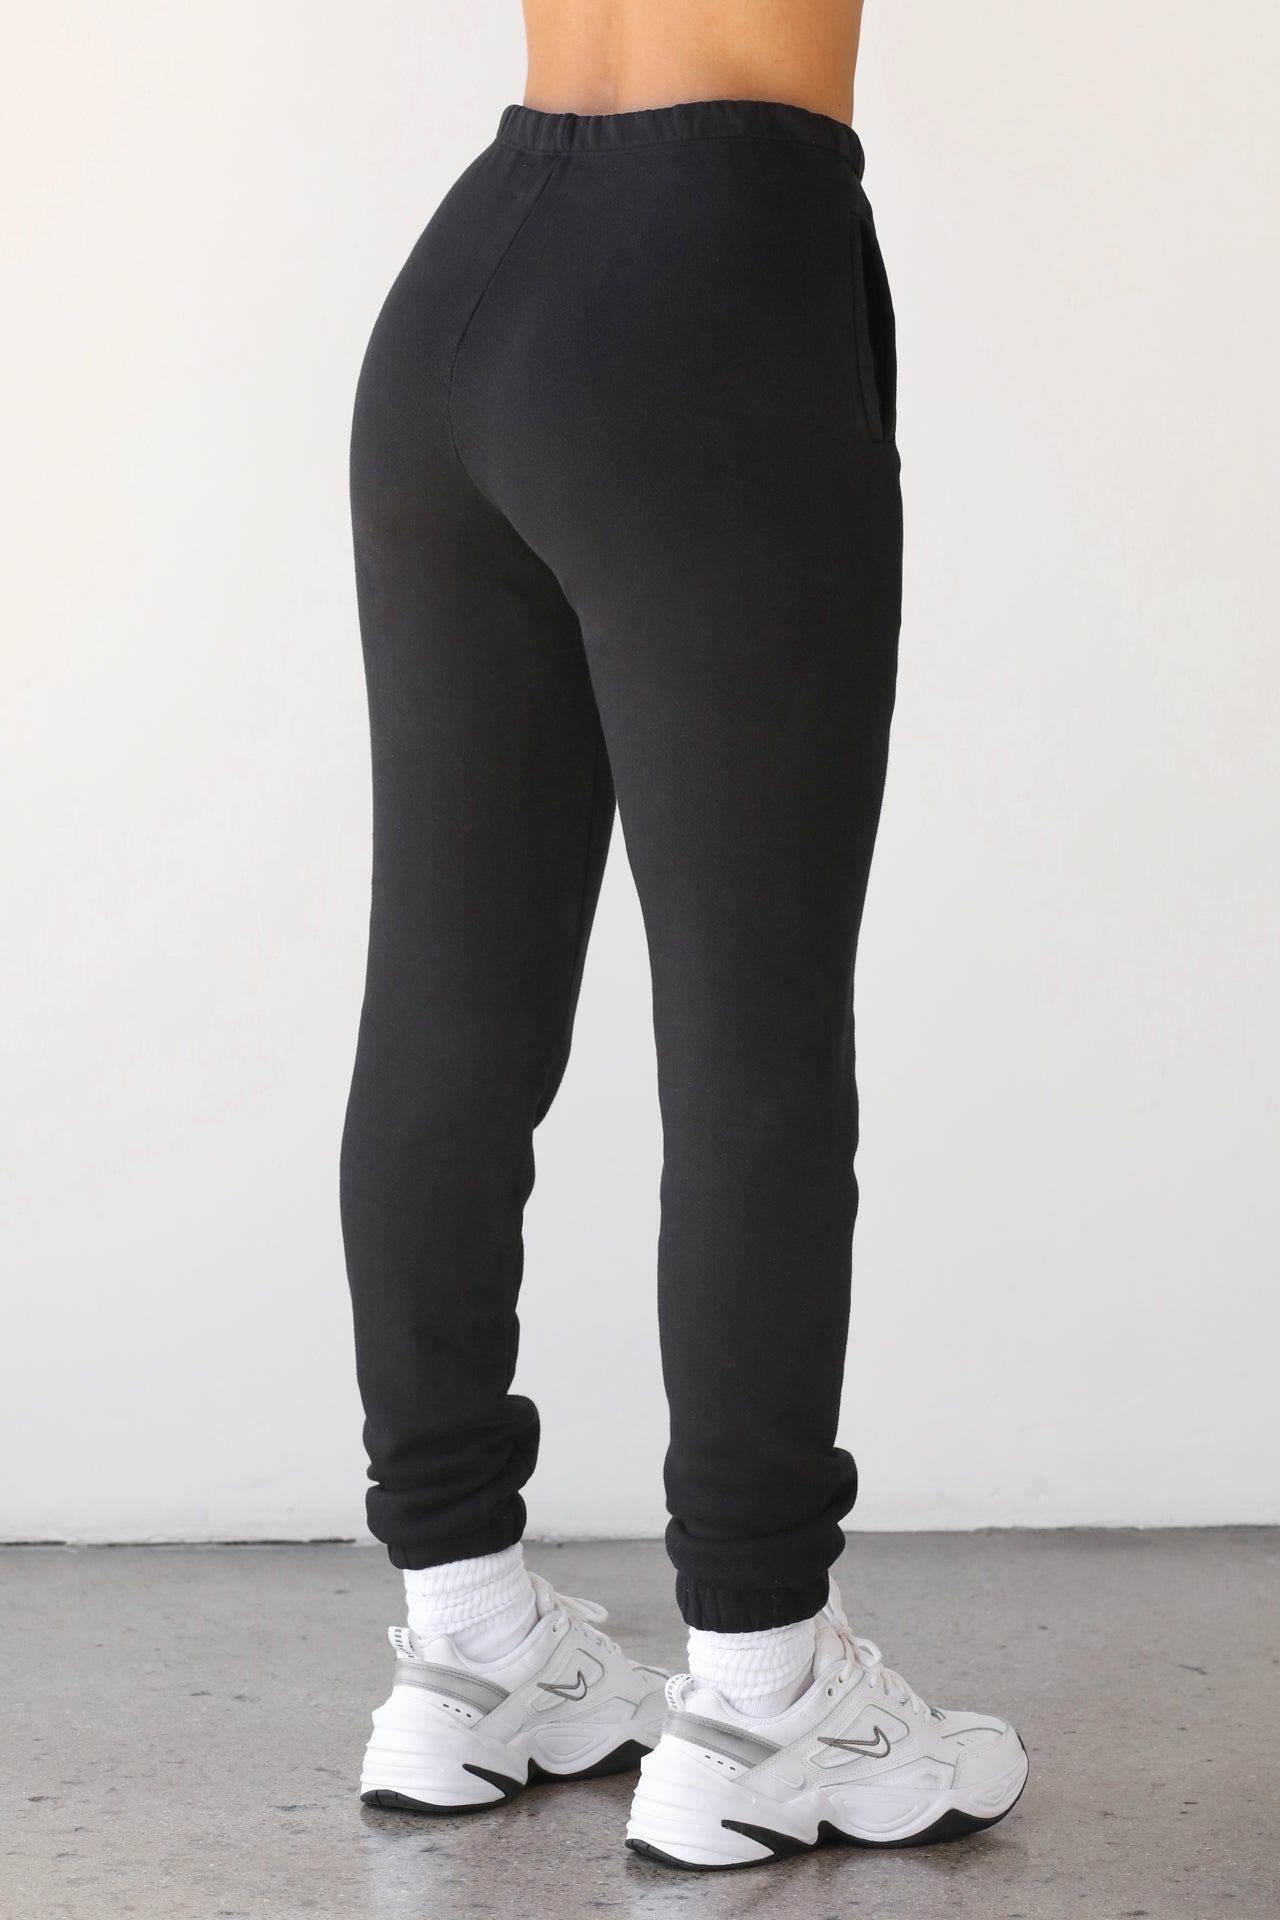 Back view of model from the waist down posing in the tapered black french terry Empire Jogger with side pockets and an elastic waistband and ankle cuffs